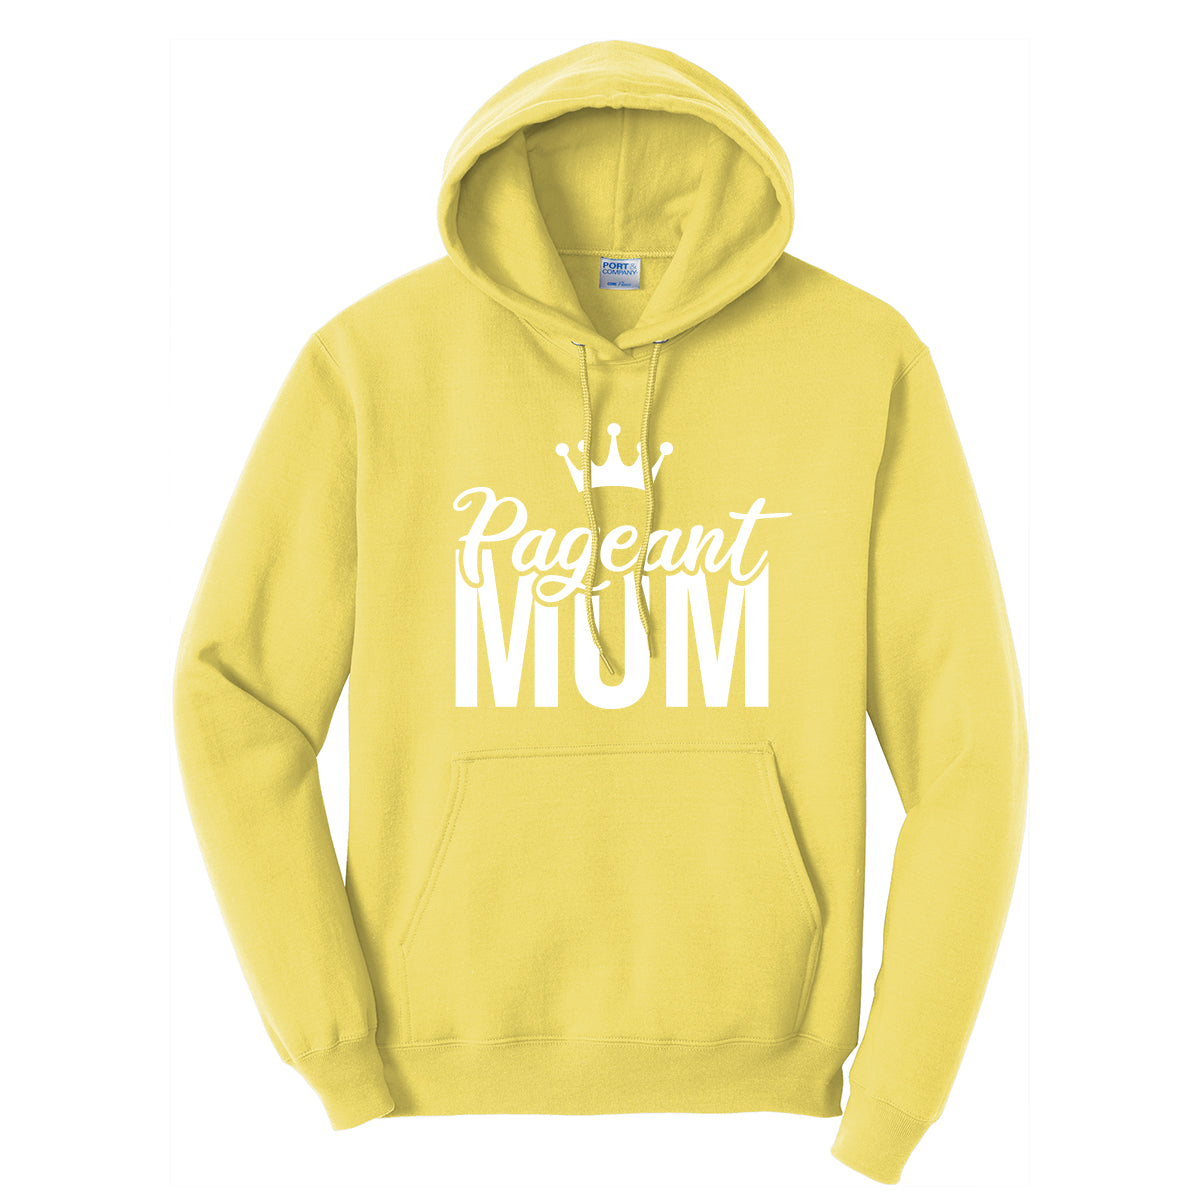 Pageant Mom Hoodie